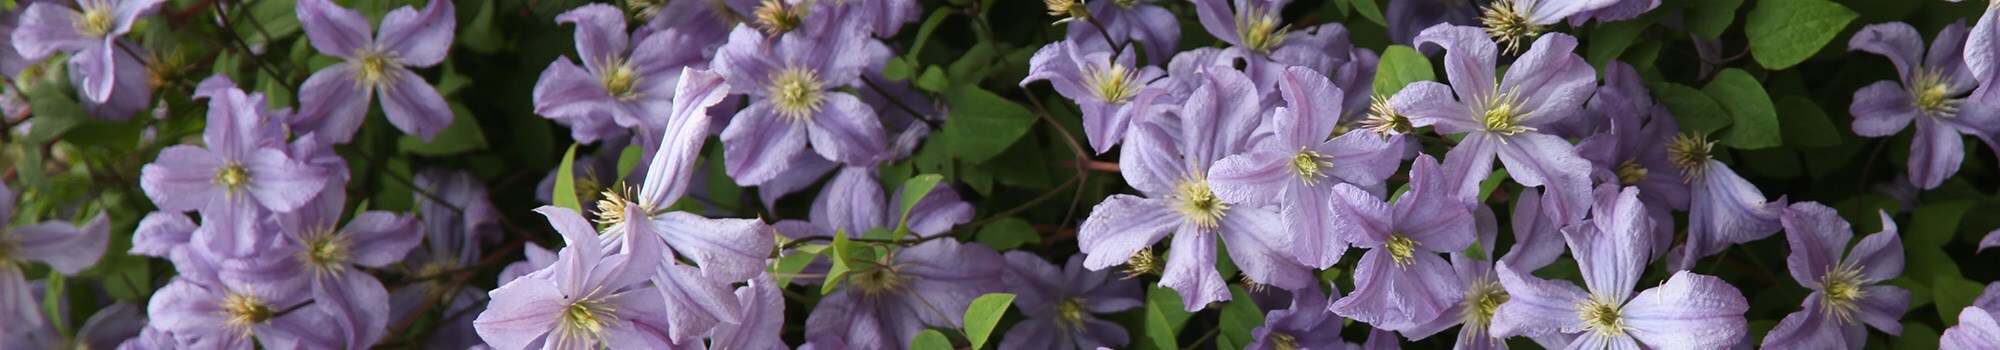 Article hero - Large-flowered clematis